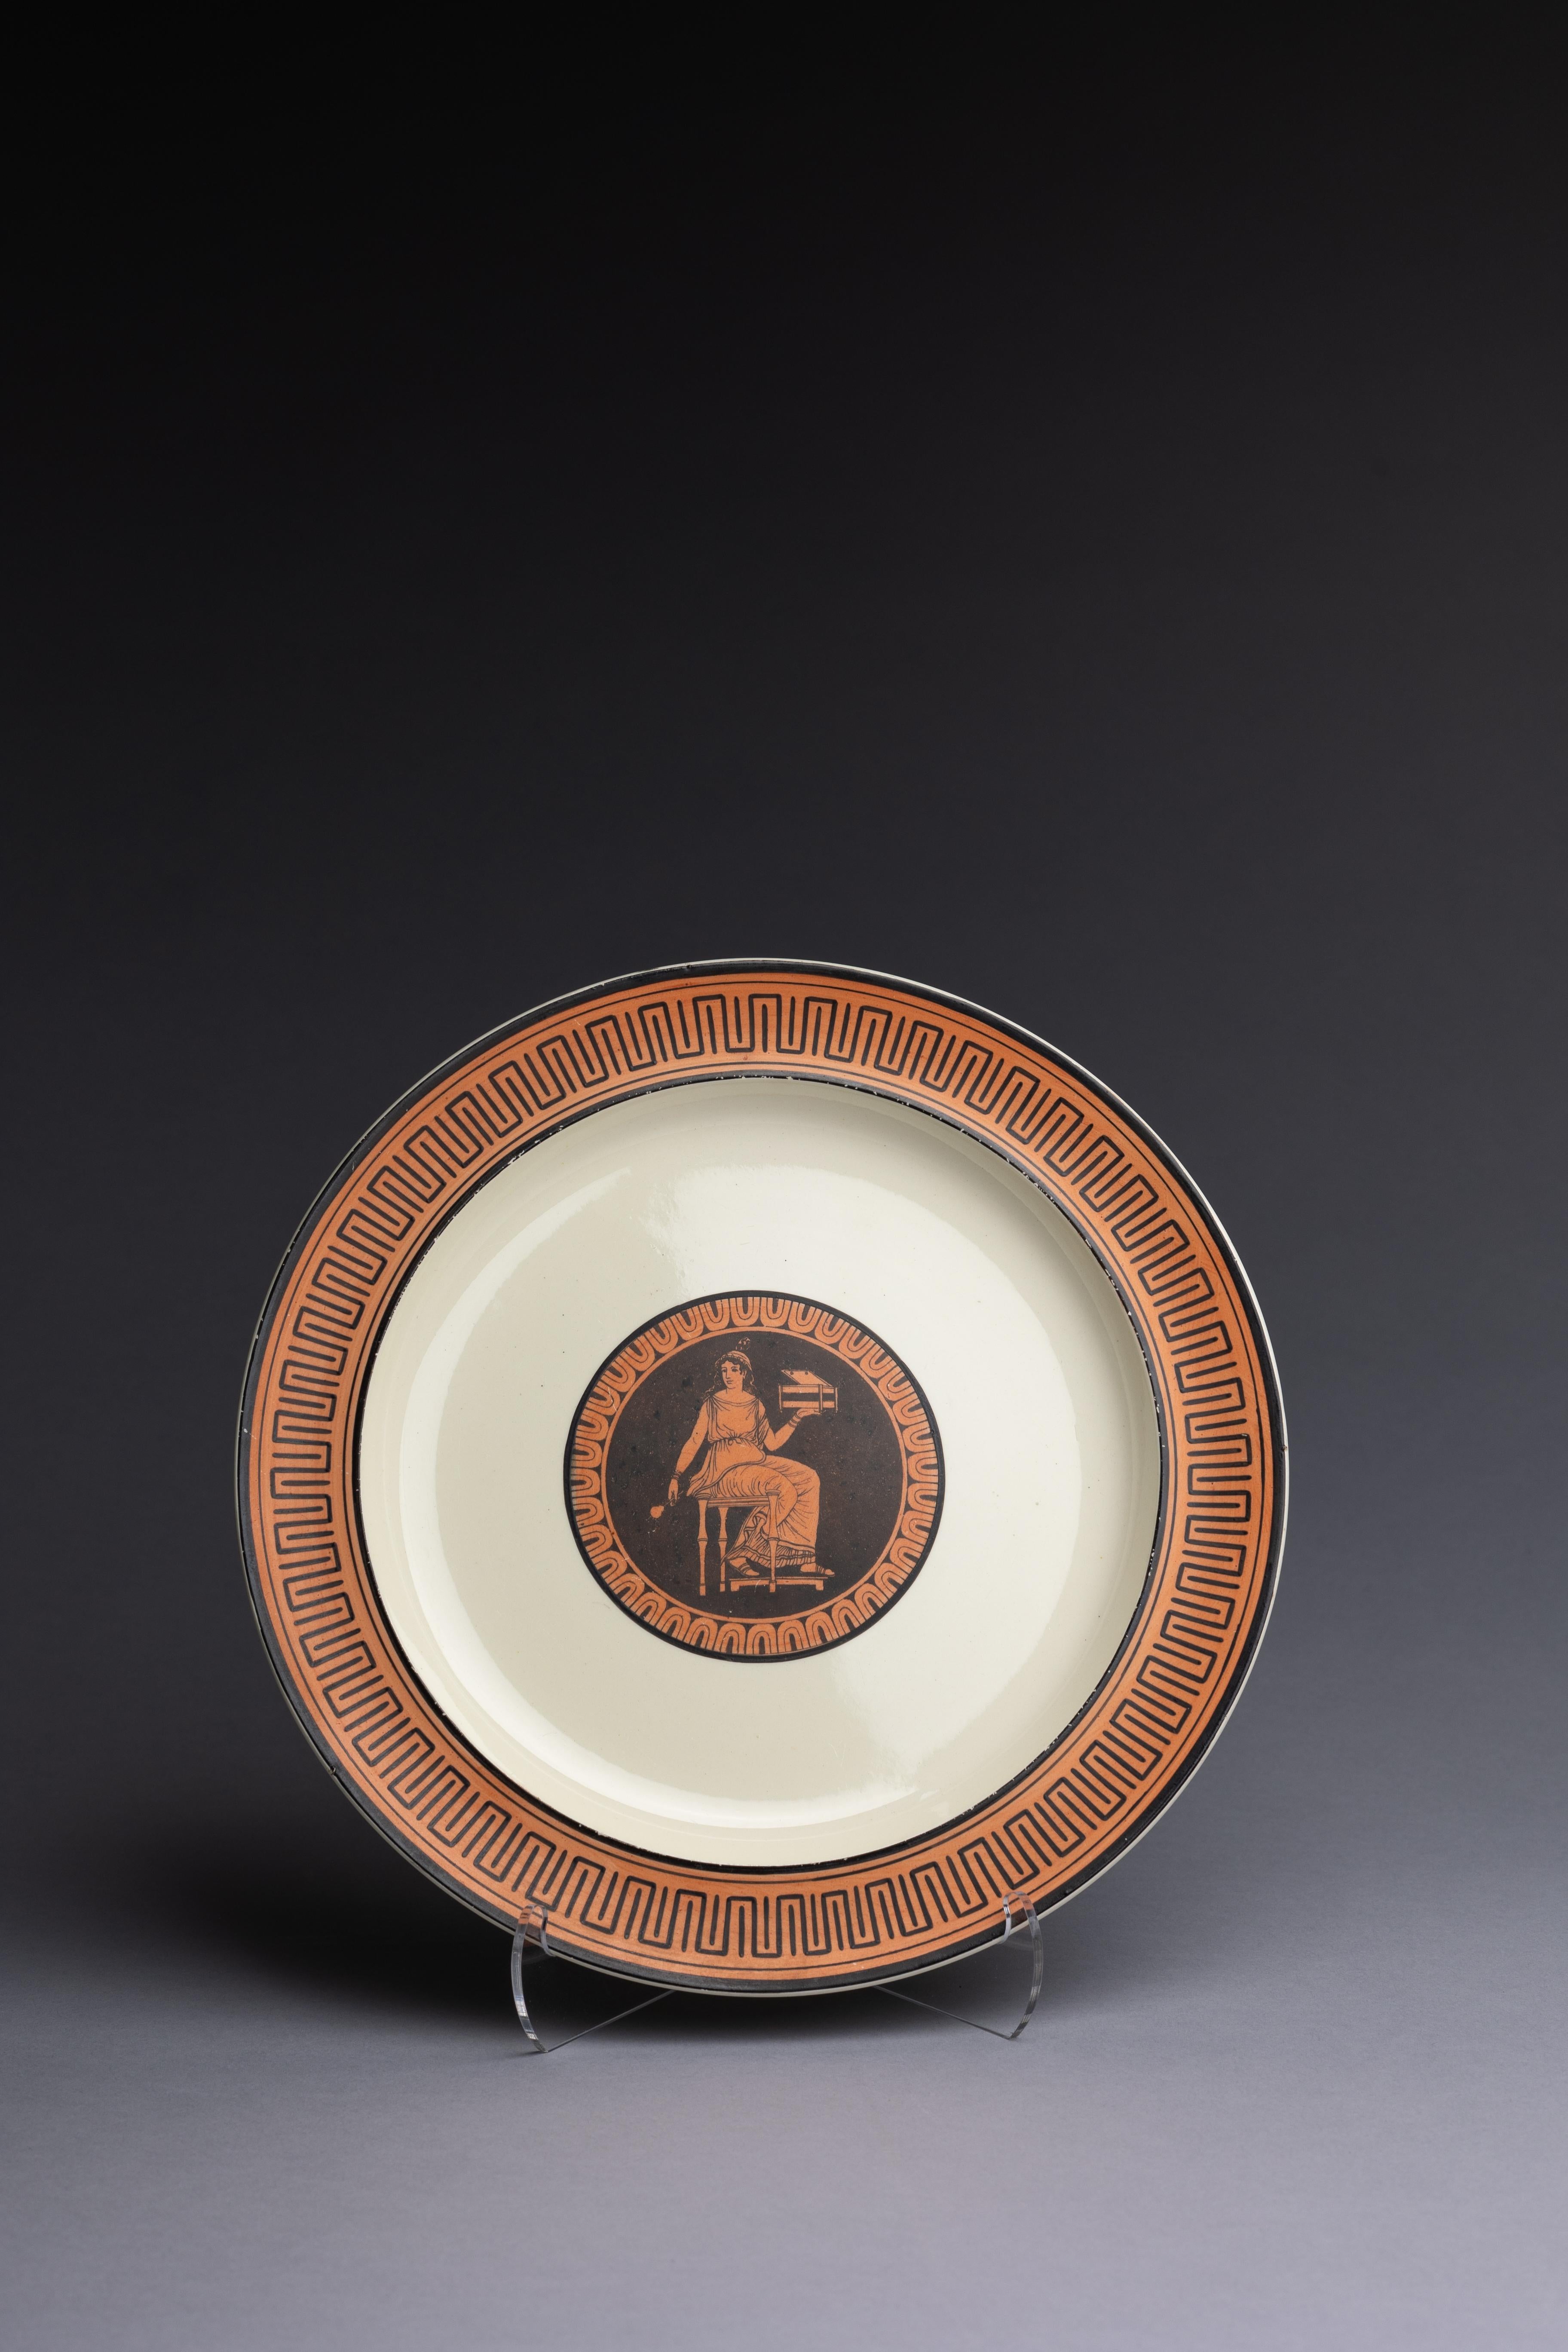 A set of six early Wedgwood creamware Neoclassical dessert dishes made circa 1780.

Sir William Hamilton’s Collection of Etruscan, Greek and Roman antiquities, published in 1766 by Pierre d’Hancarville, was a landmark publication in English